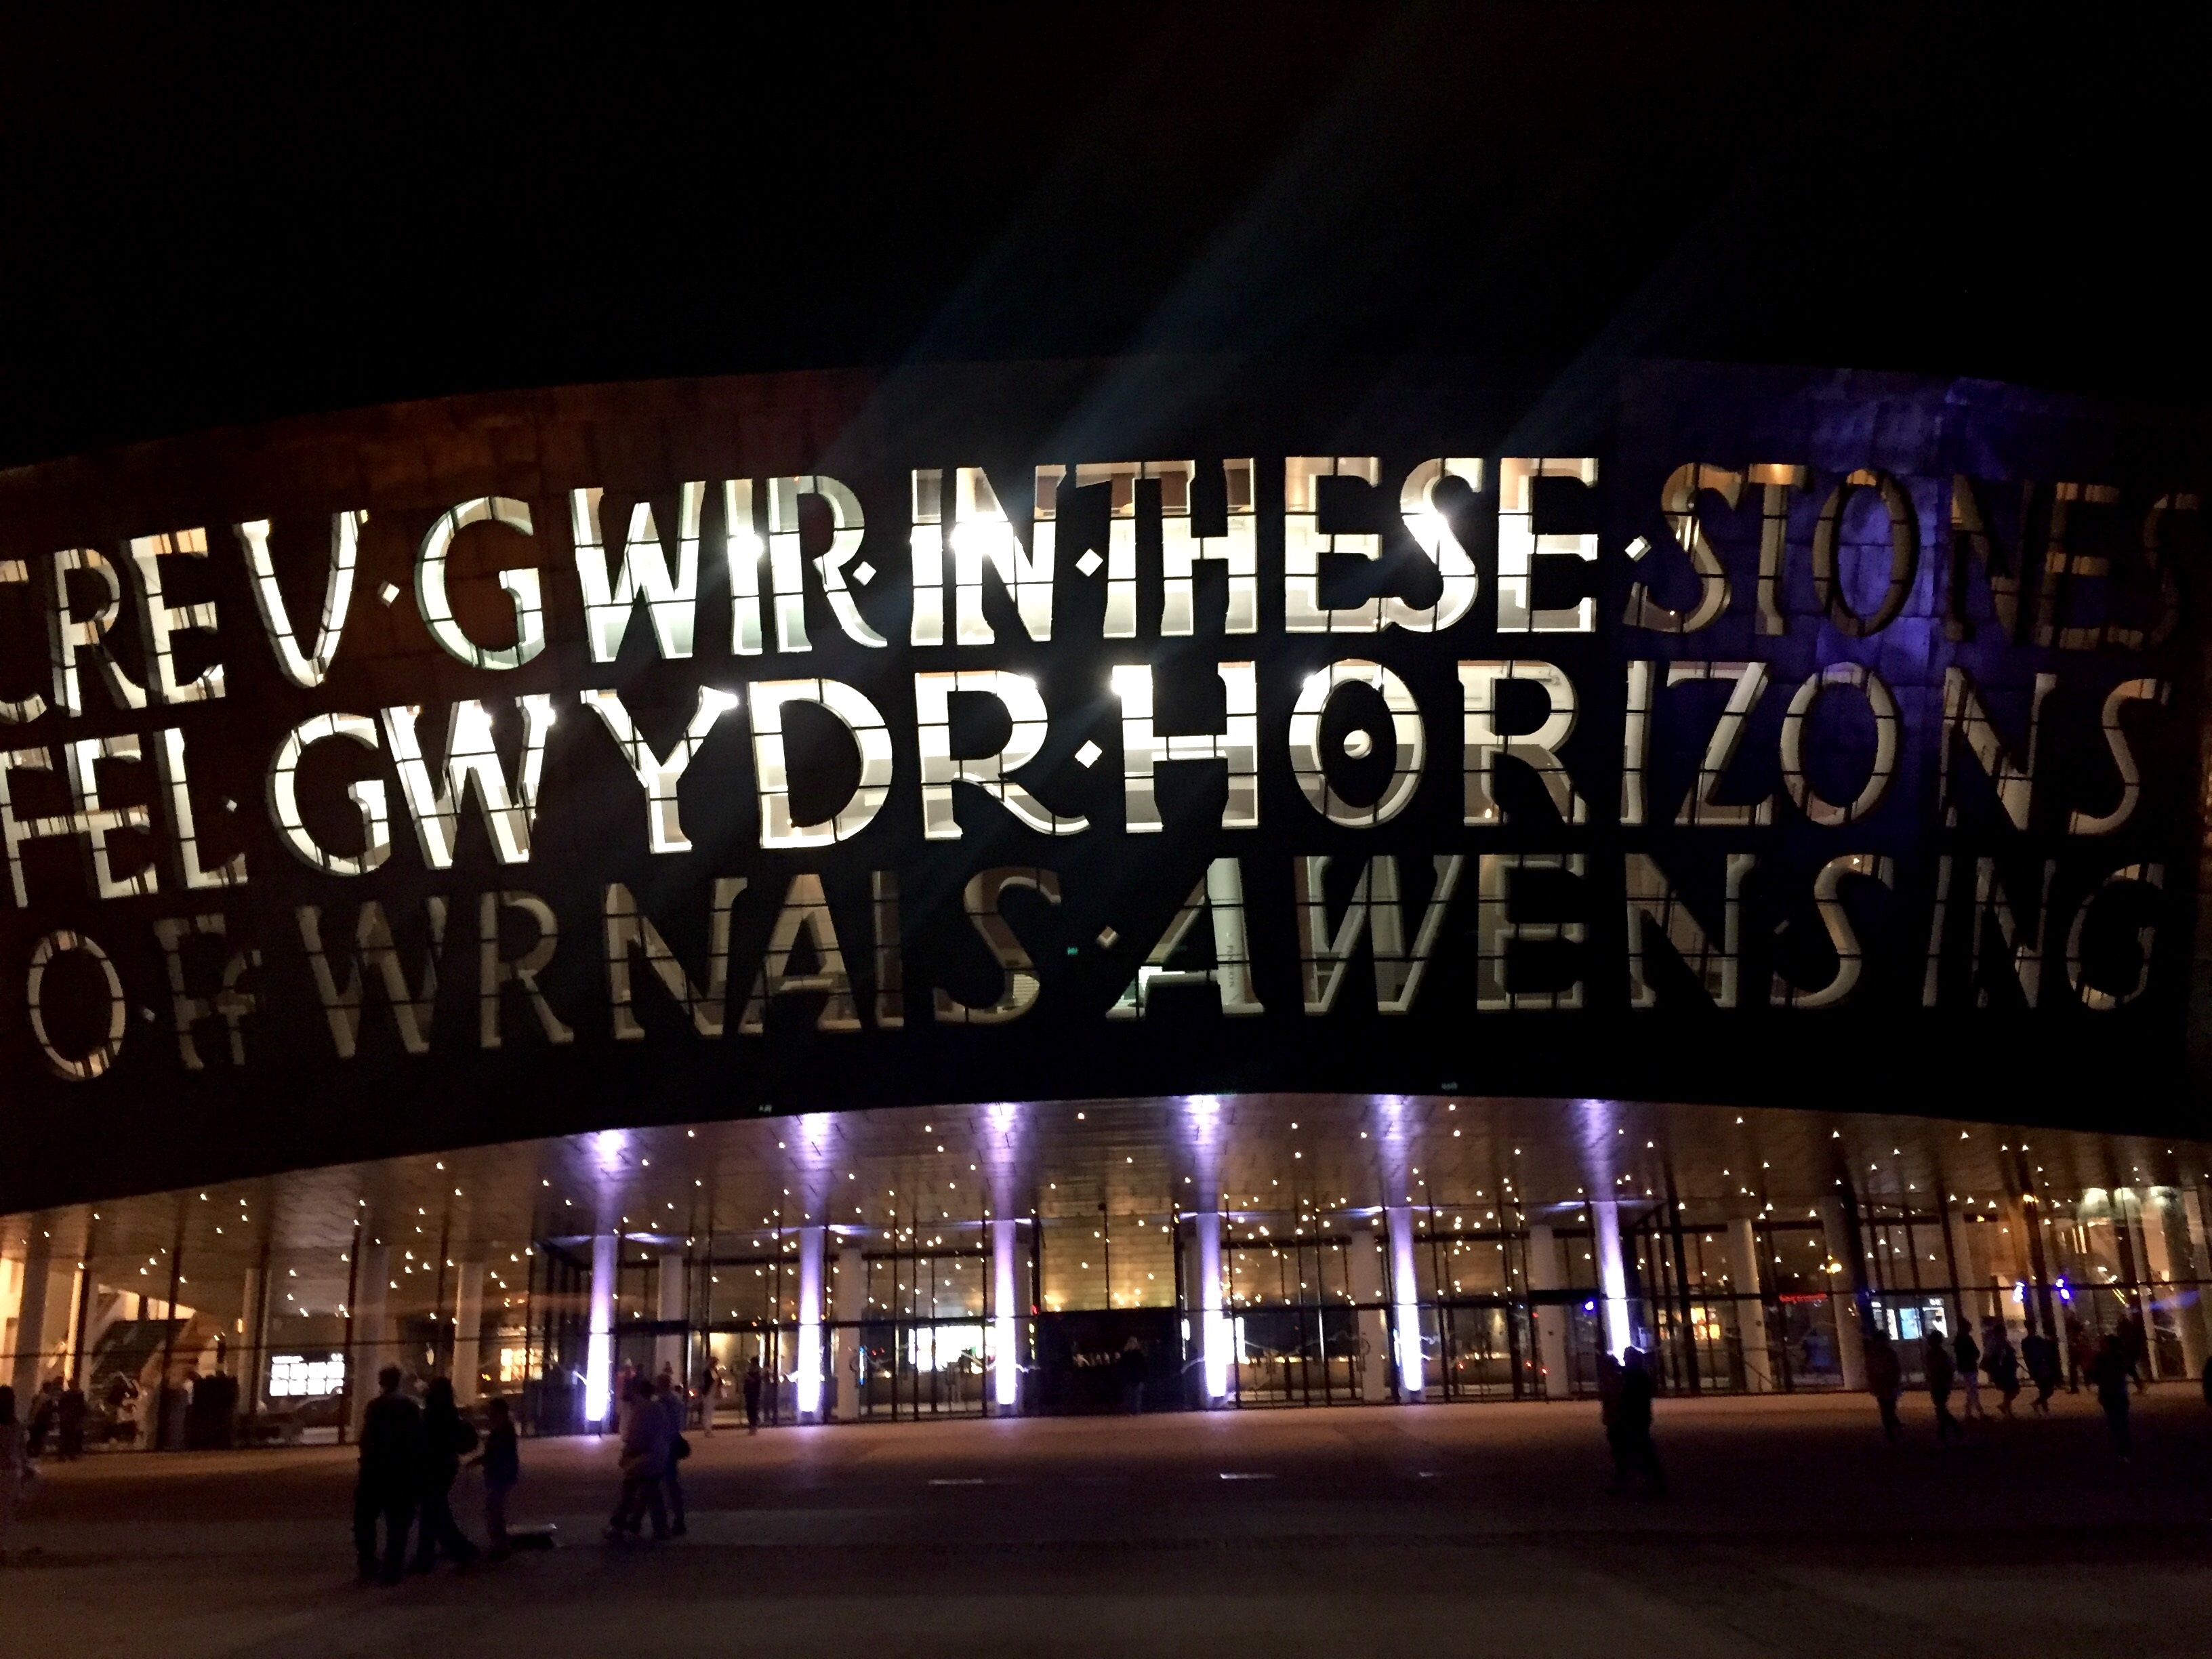 Wales Millennium Centre outside at night